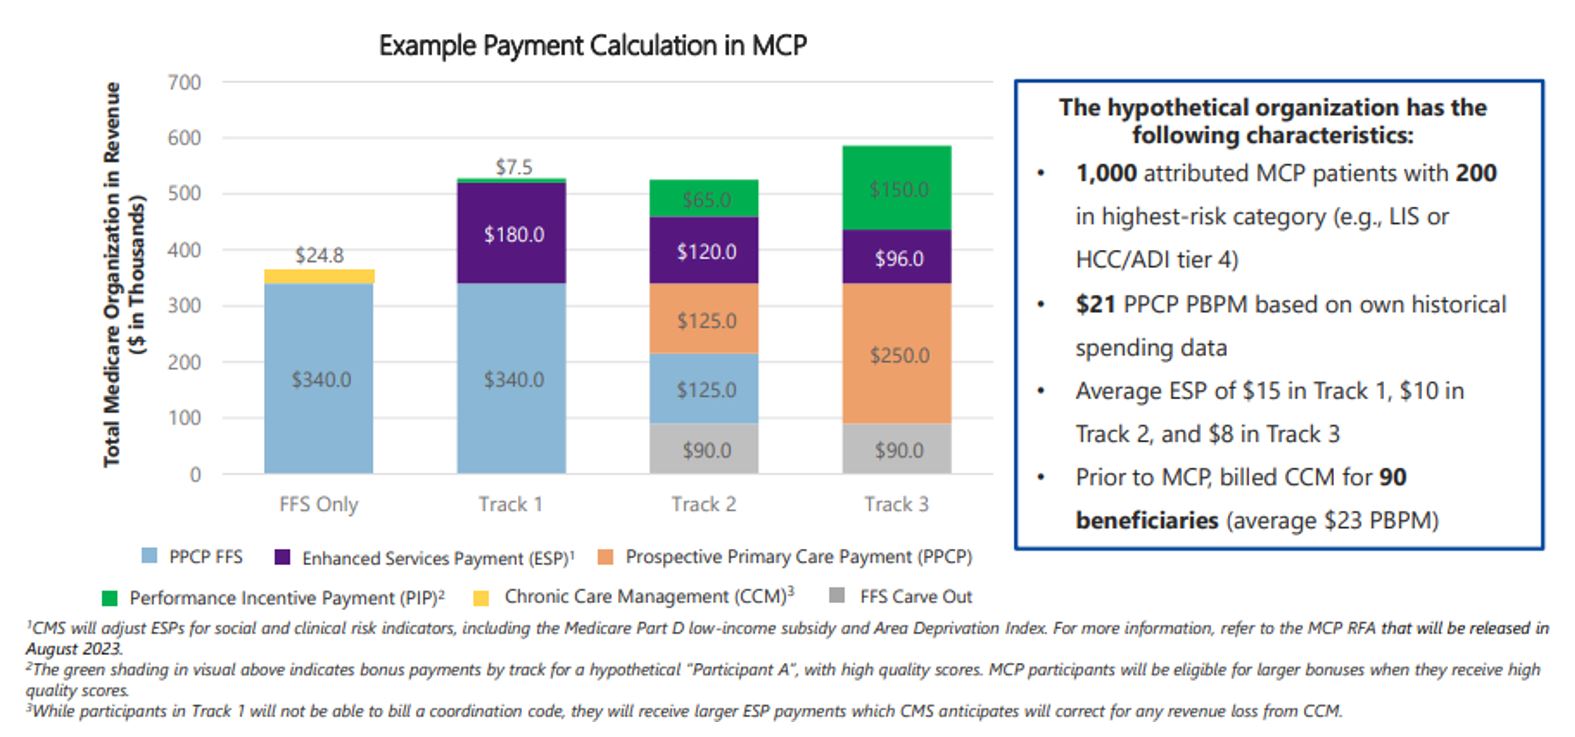 Example Payment in MCP